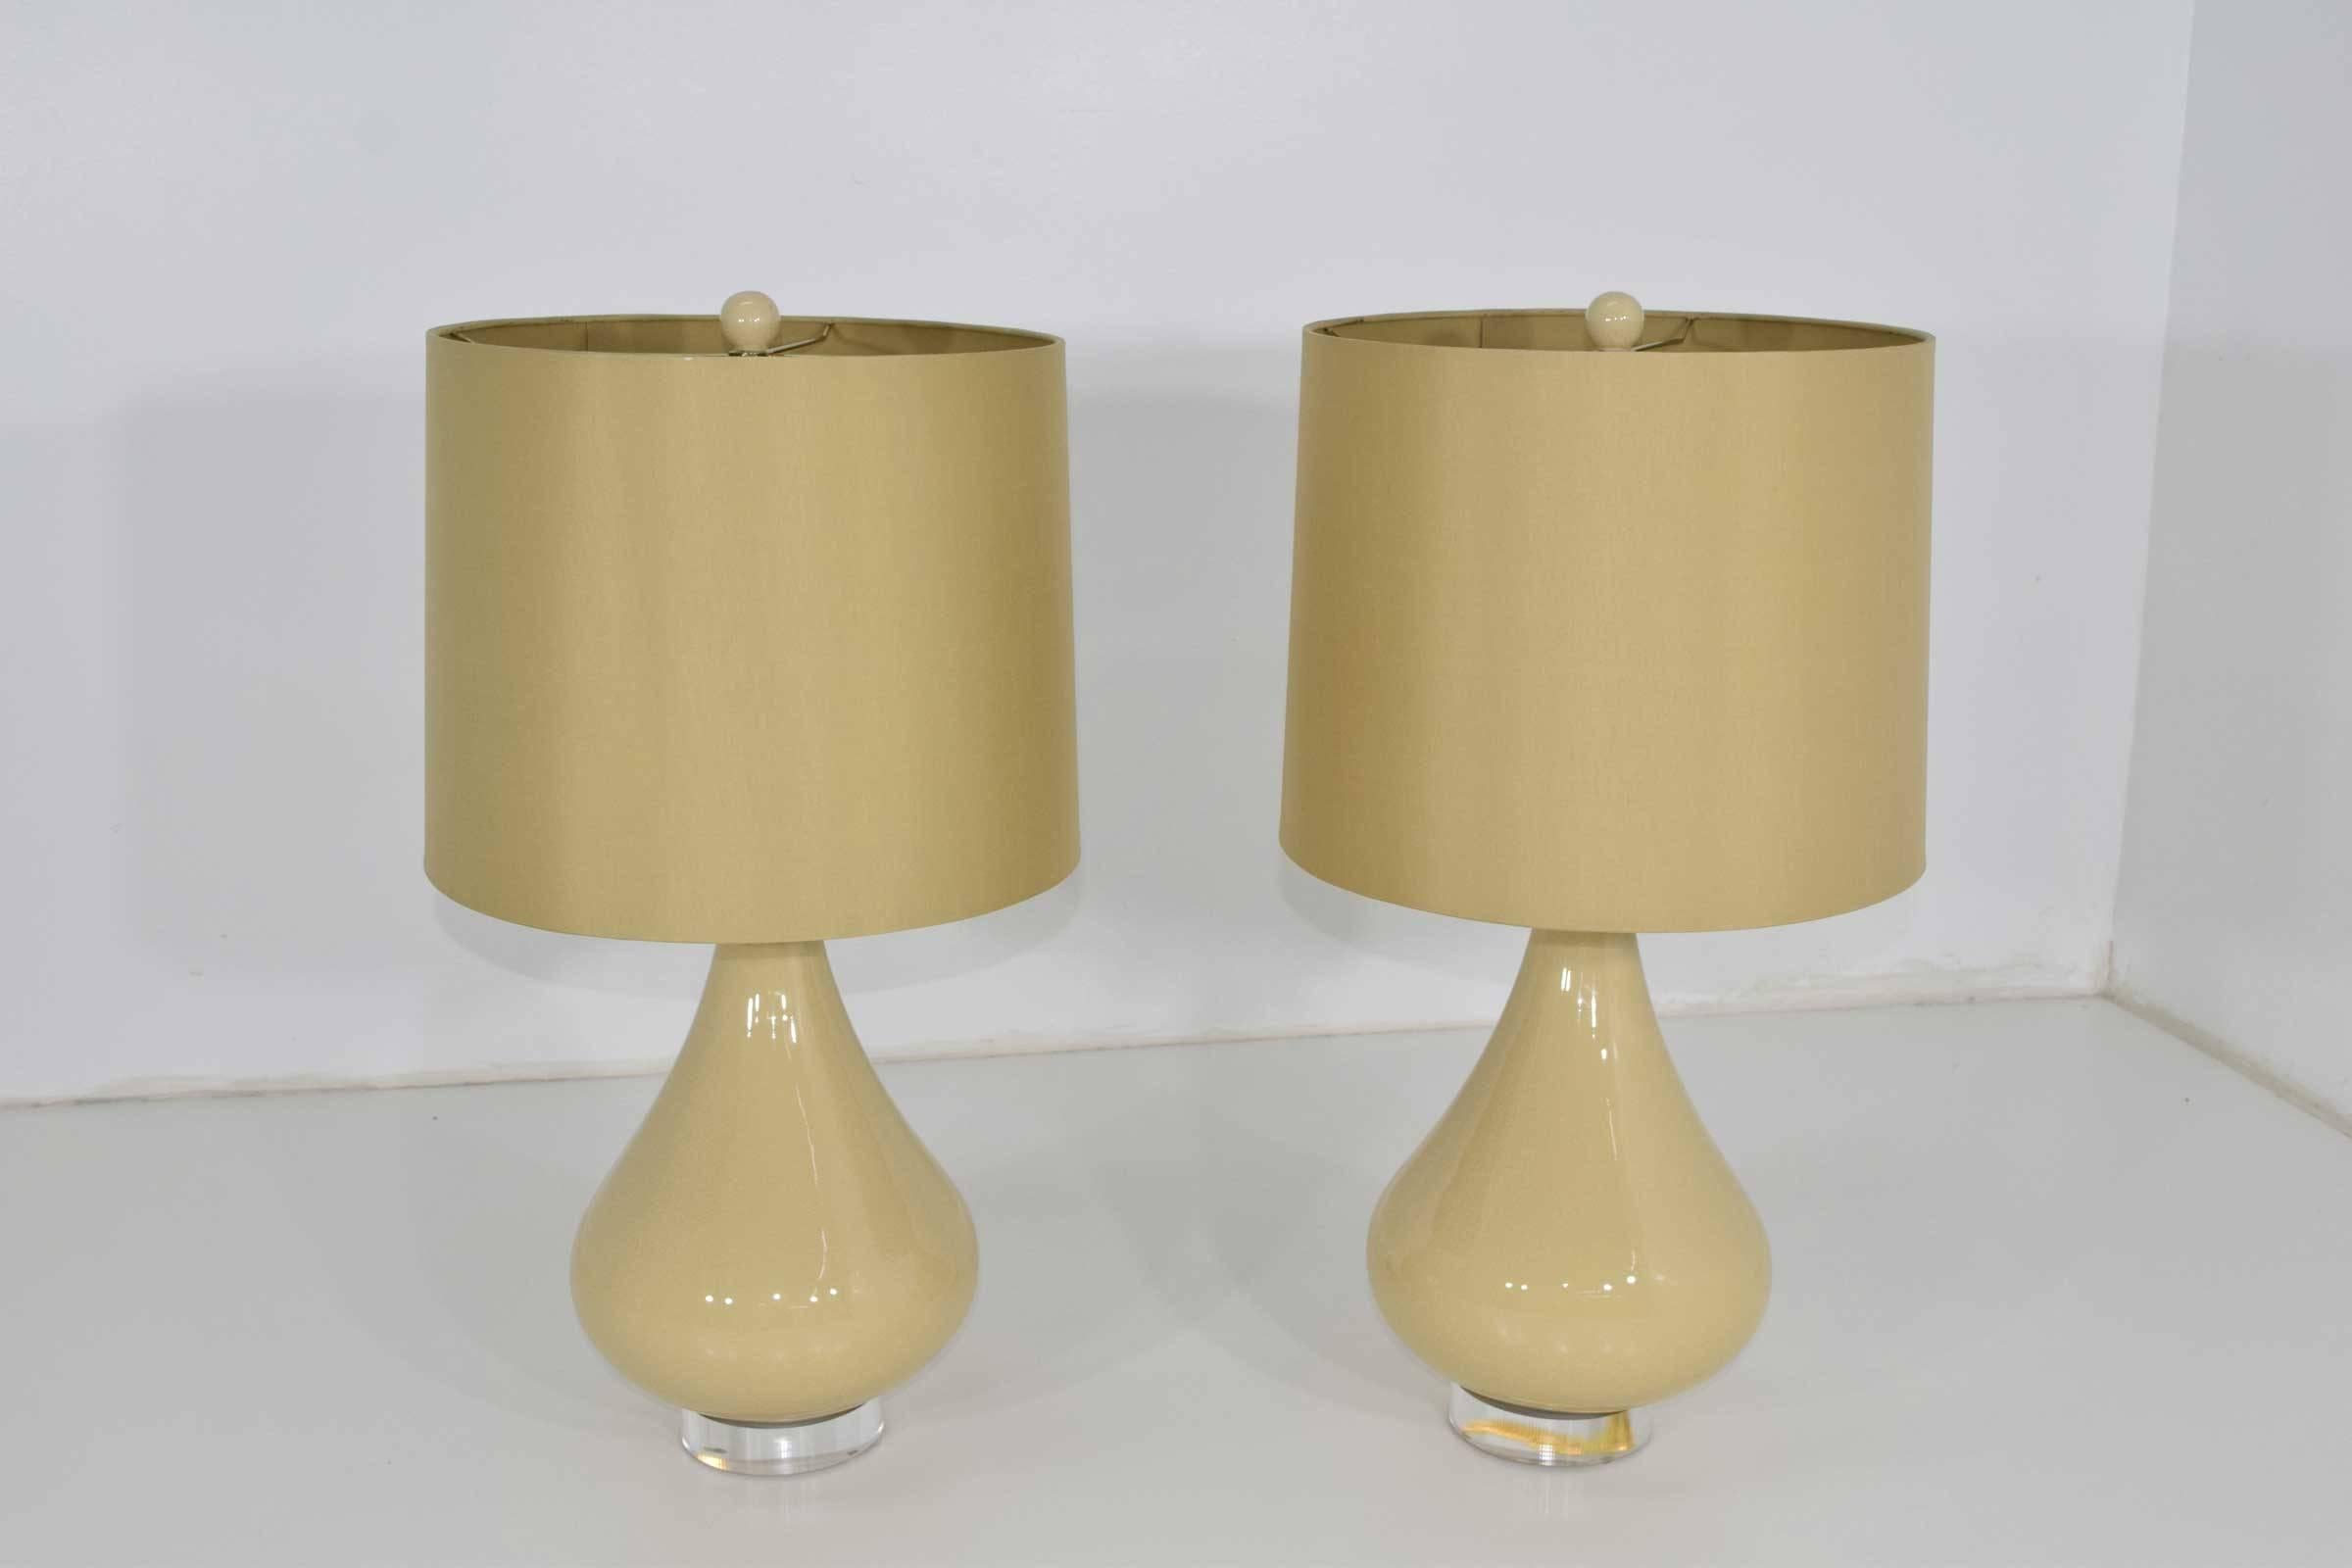 A very nice pair of ceramic lamps with Lucite bases, matching finial and silk shades.